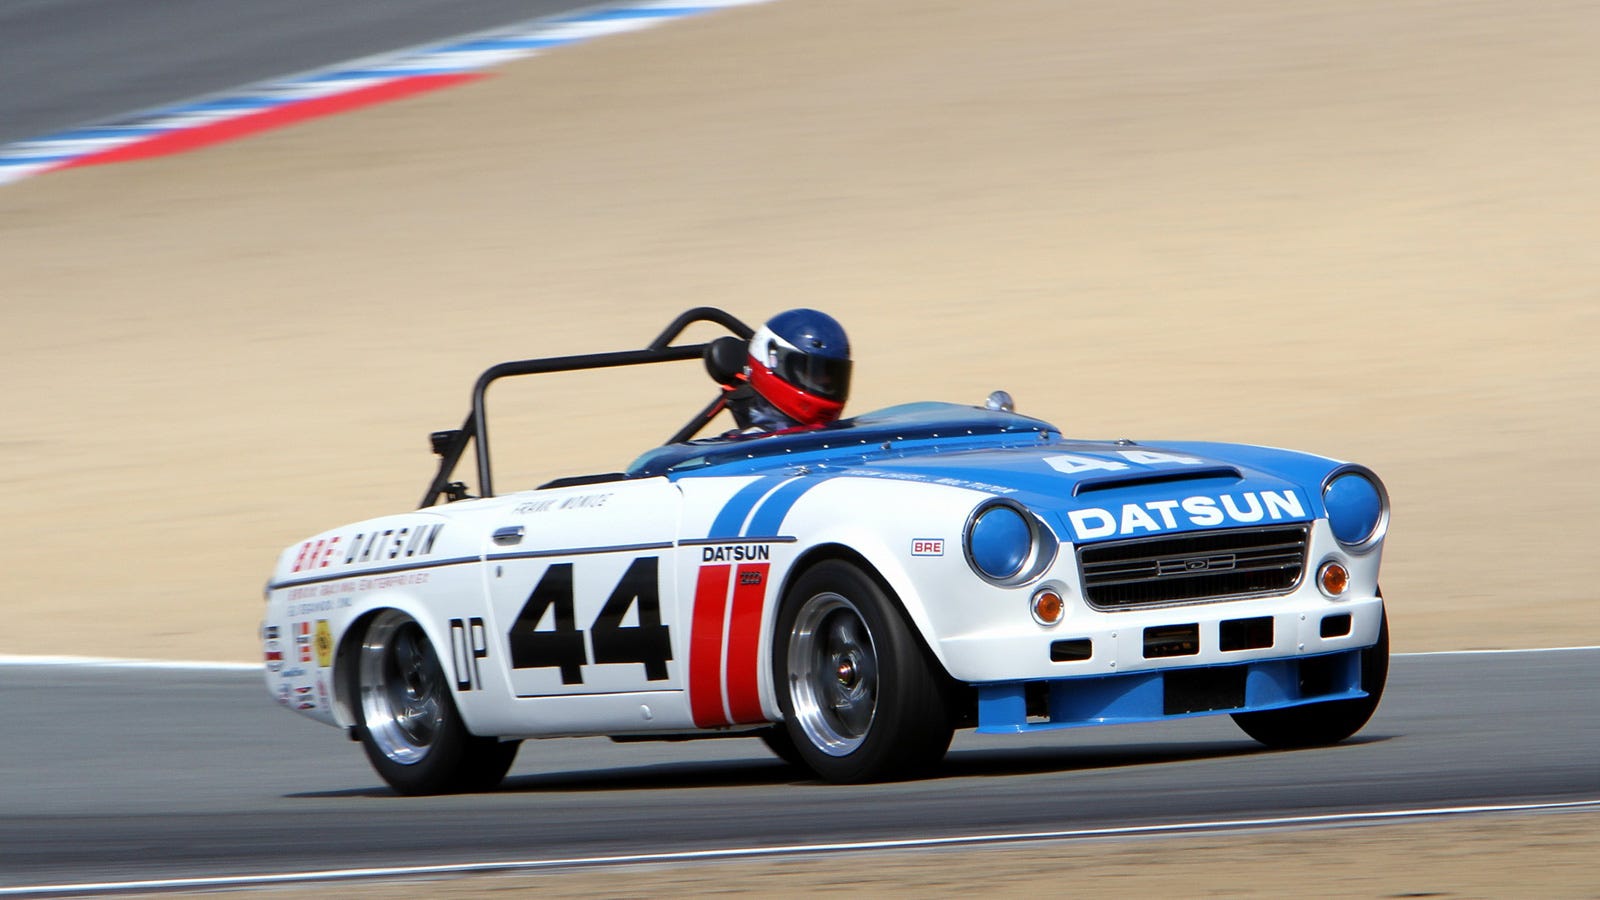 Your Ridiculously Cool Bre Datsun Roadster Wallpaper Is Here